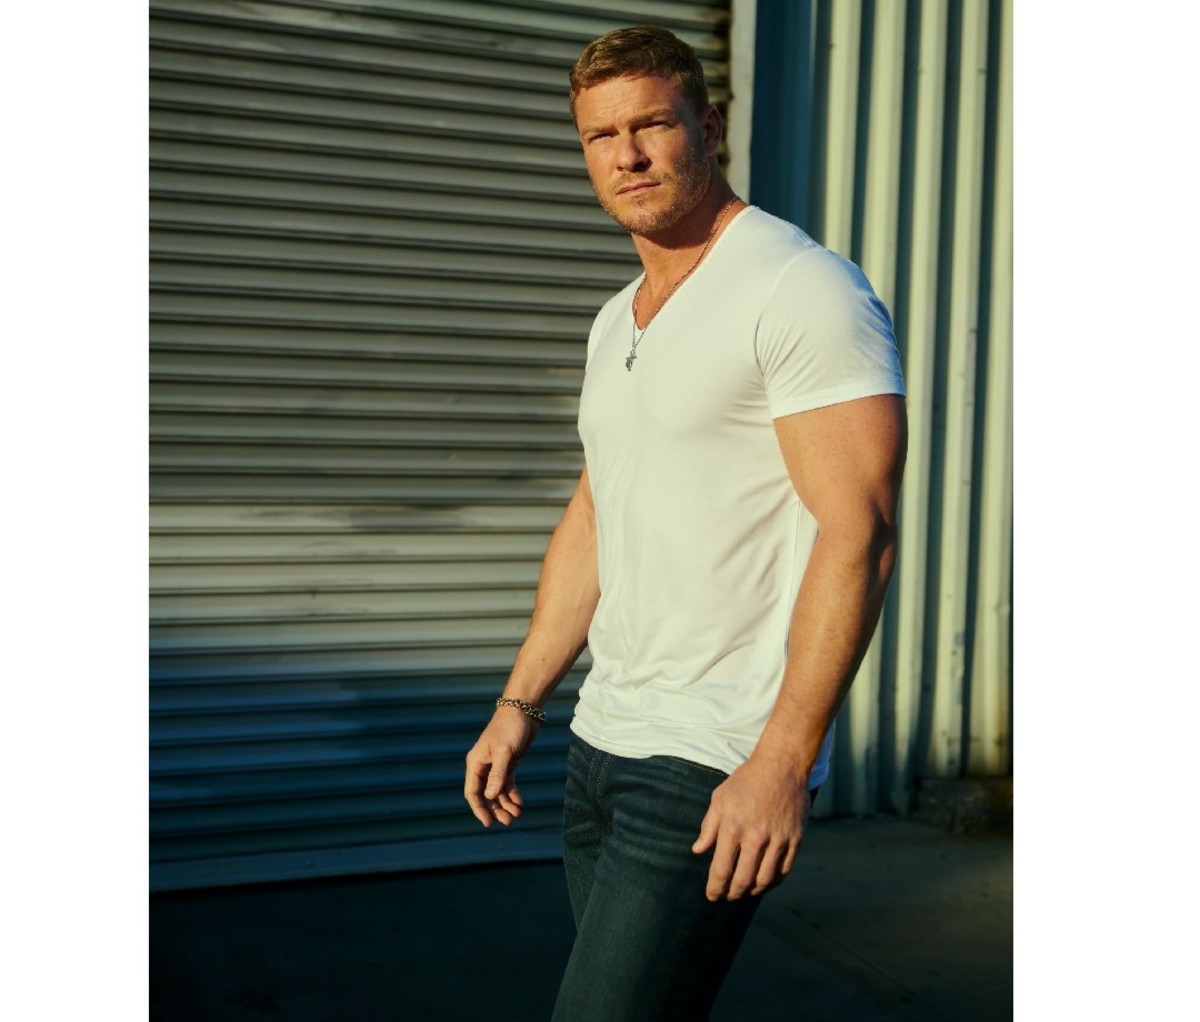 Actor Alan Ritchson stands outside in a white t-shirt during a scene from Amazon 